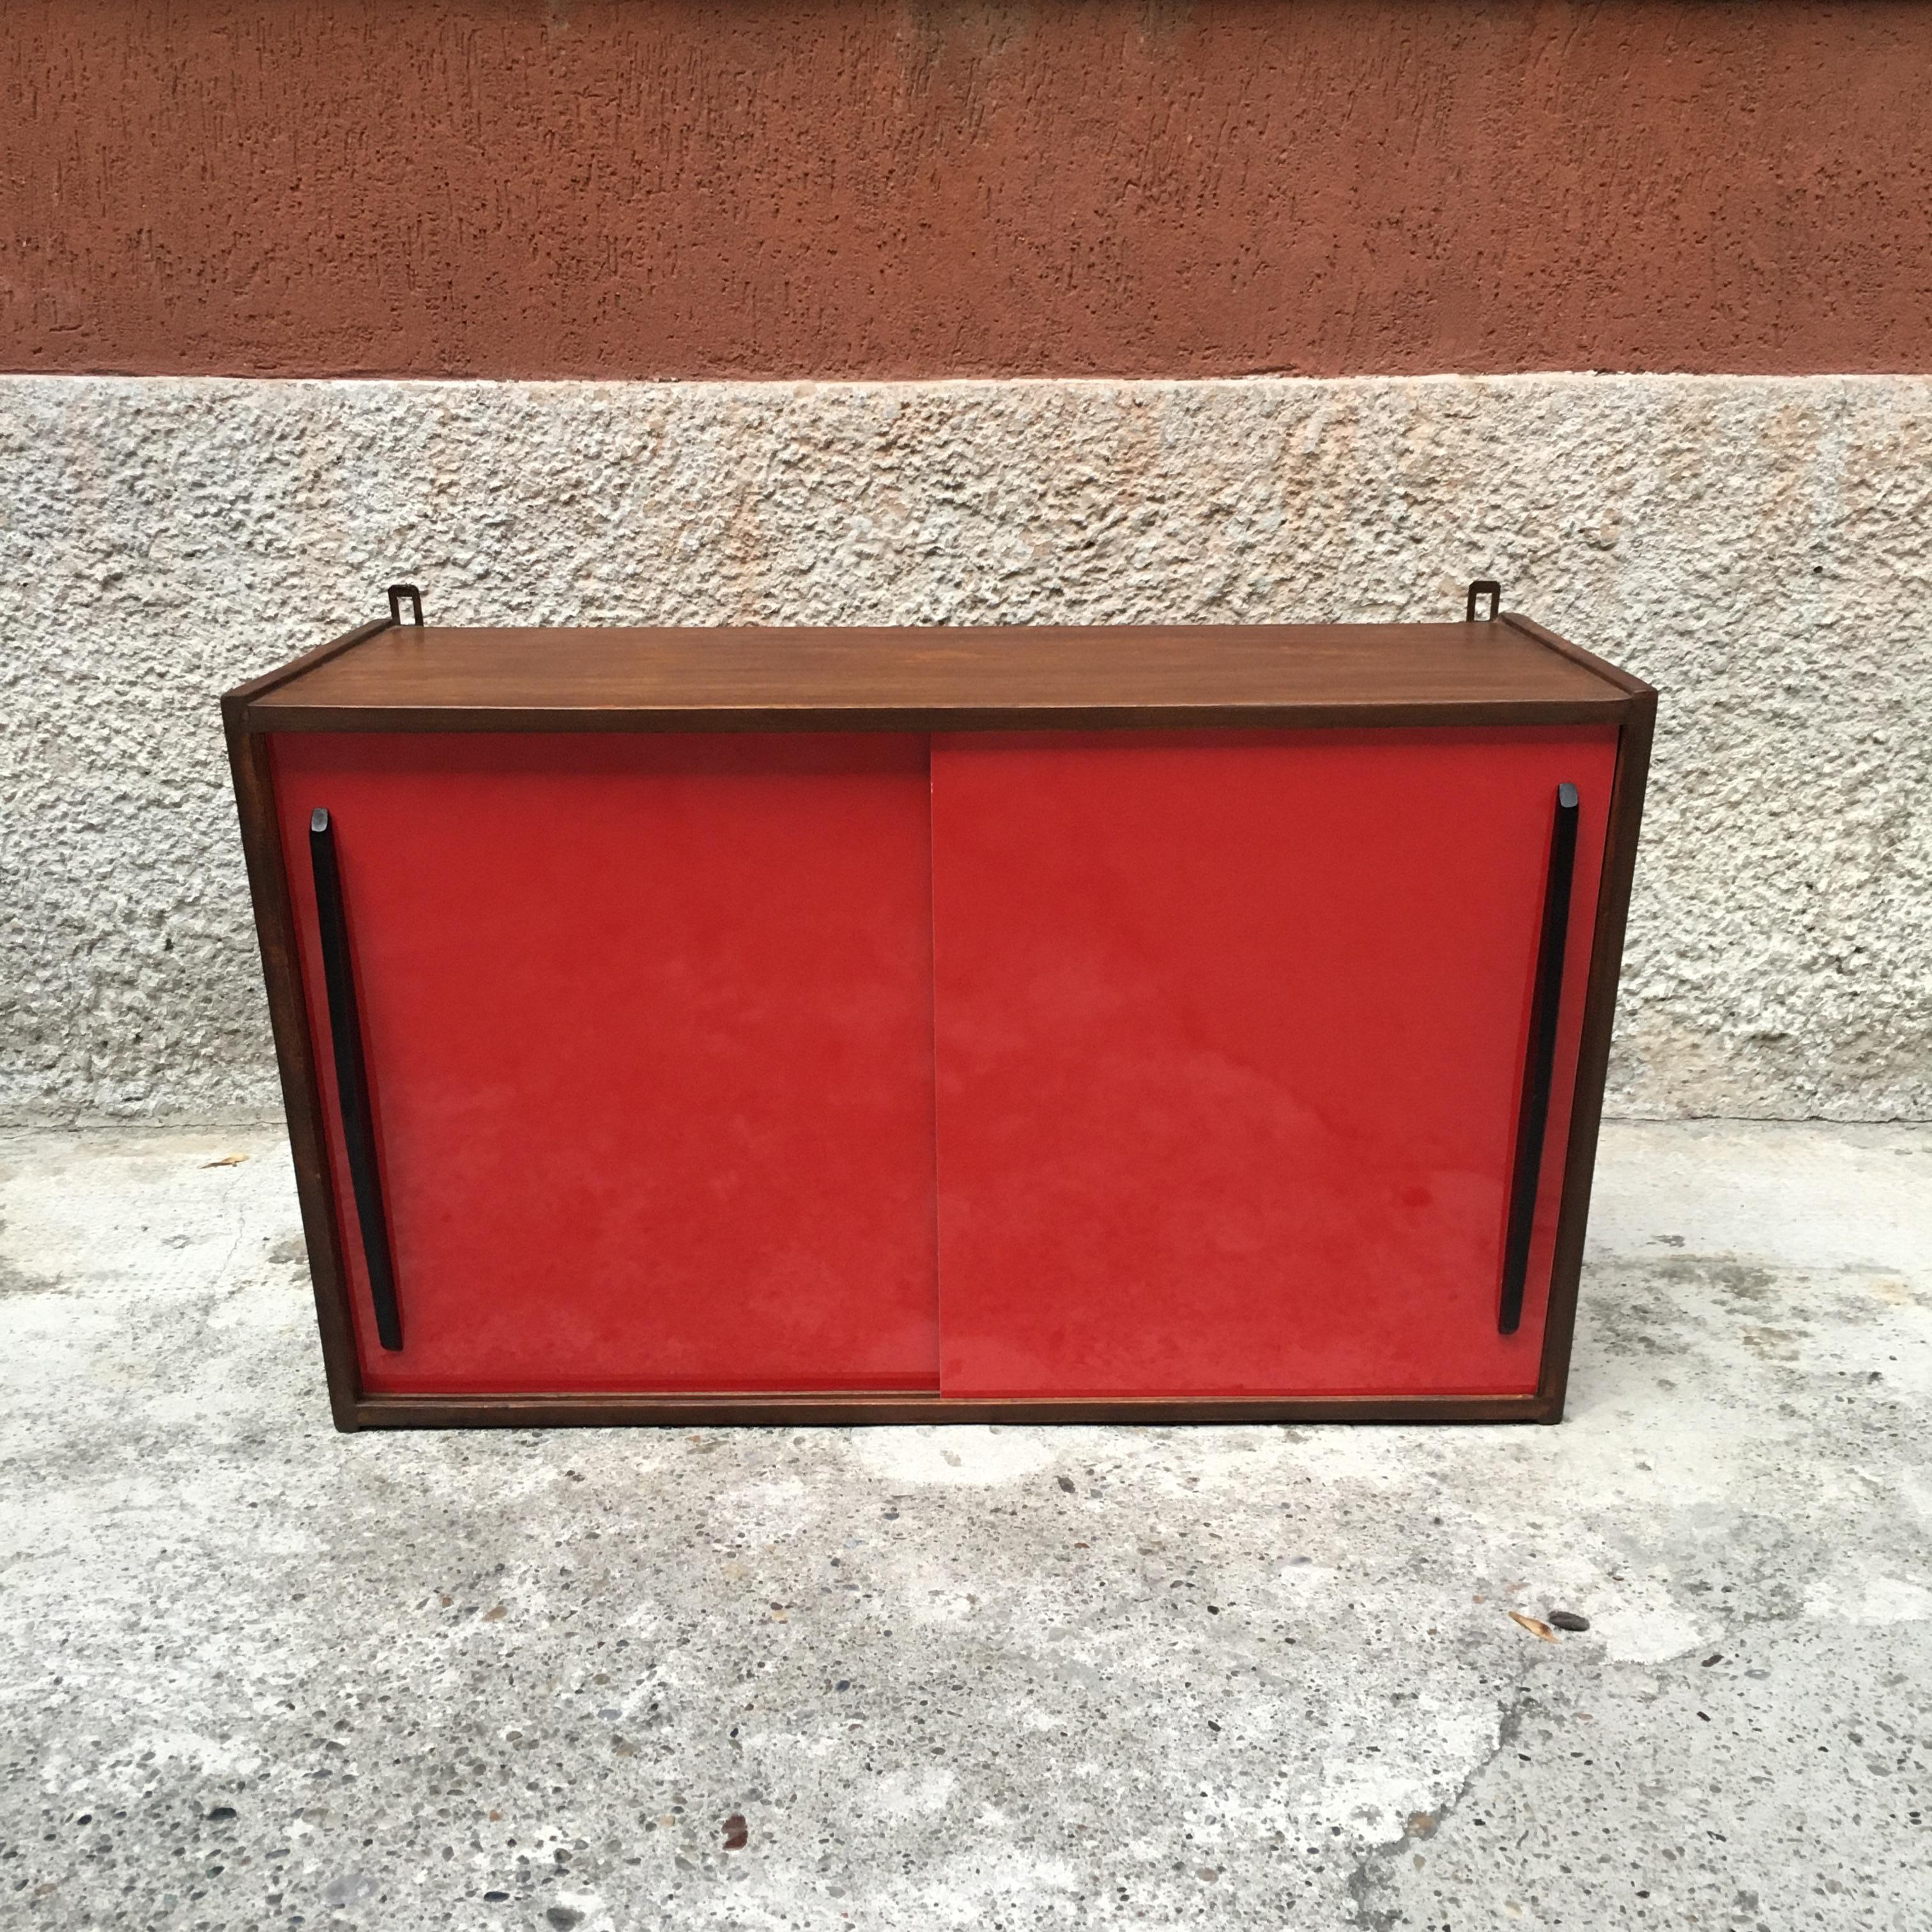 Italian red formica and black wood kitchen wall unit, 1960s
Sliding doors wall unit with glossy red formica surface and black painted wood handles.
Colored in compliance with the original finishes and fully restored.